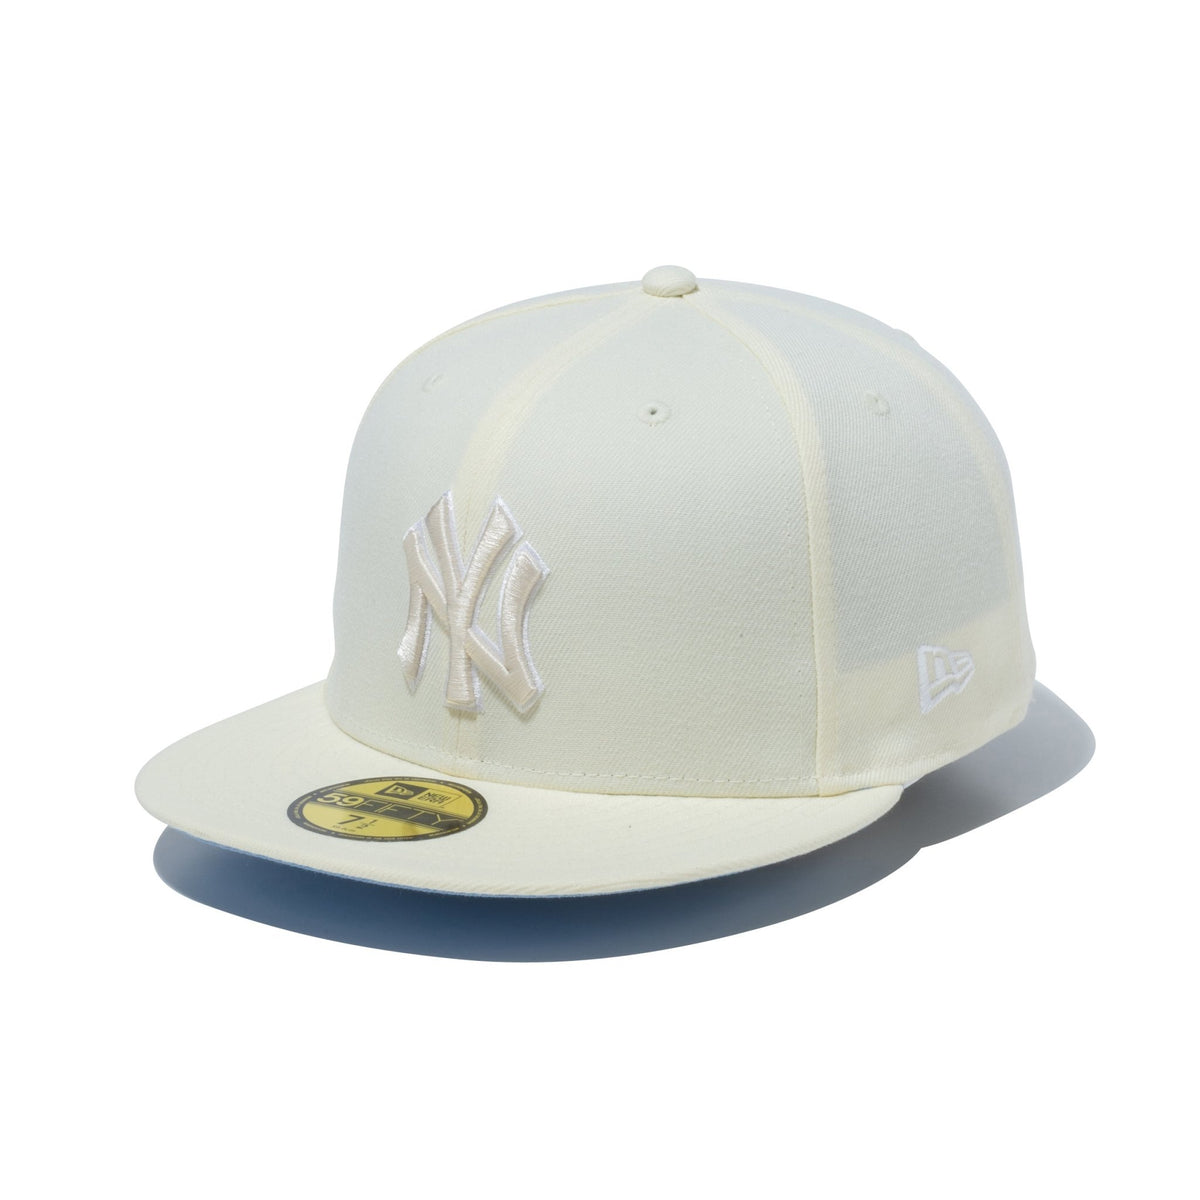 59FIFTY White Collection ニューヨーク・ヤンキース ホワイト